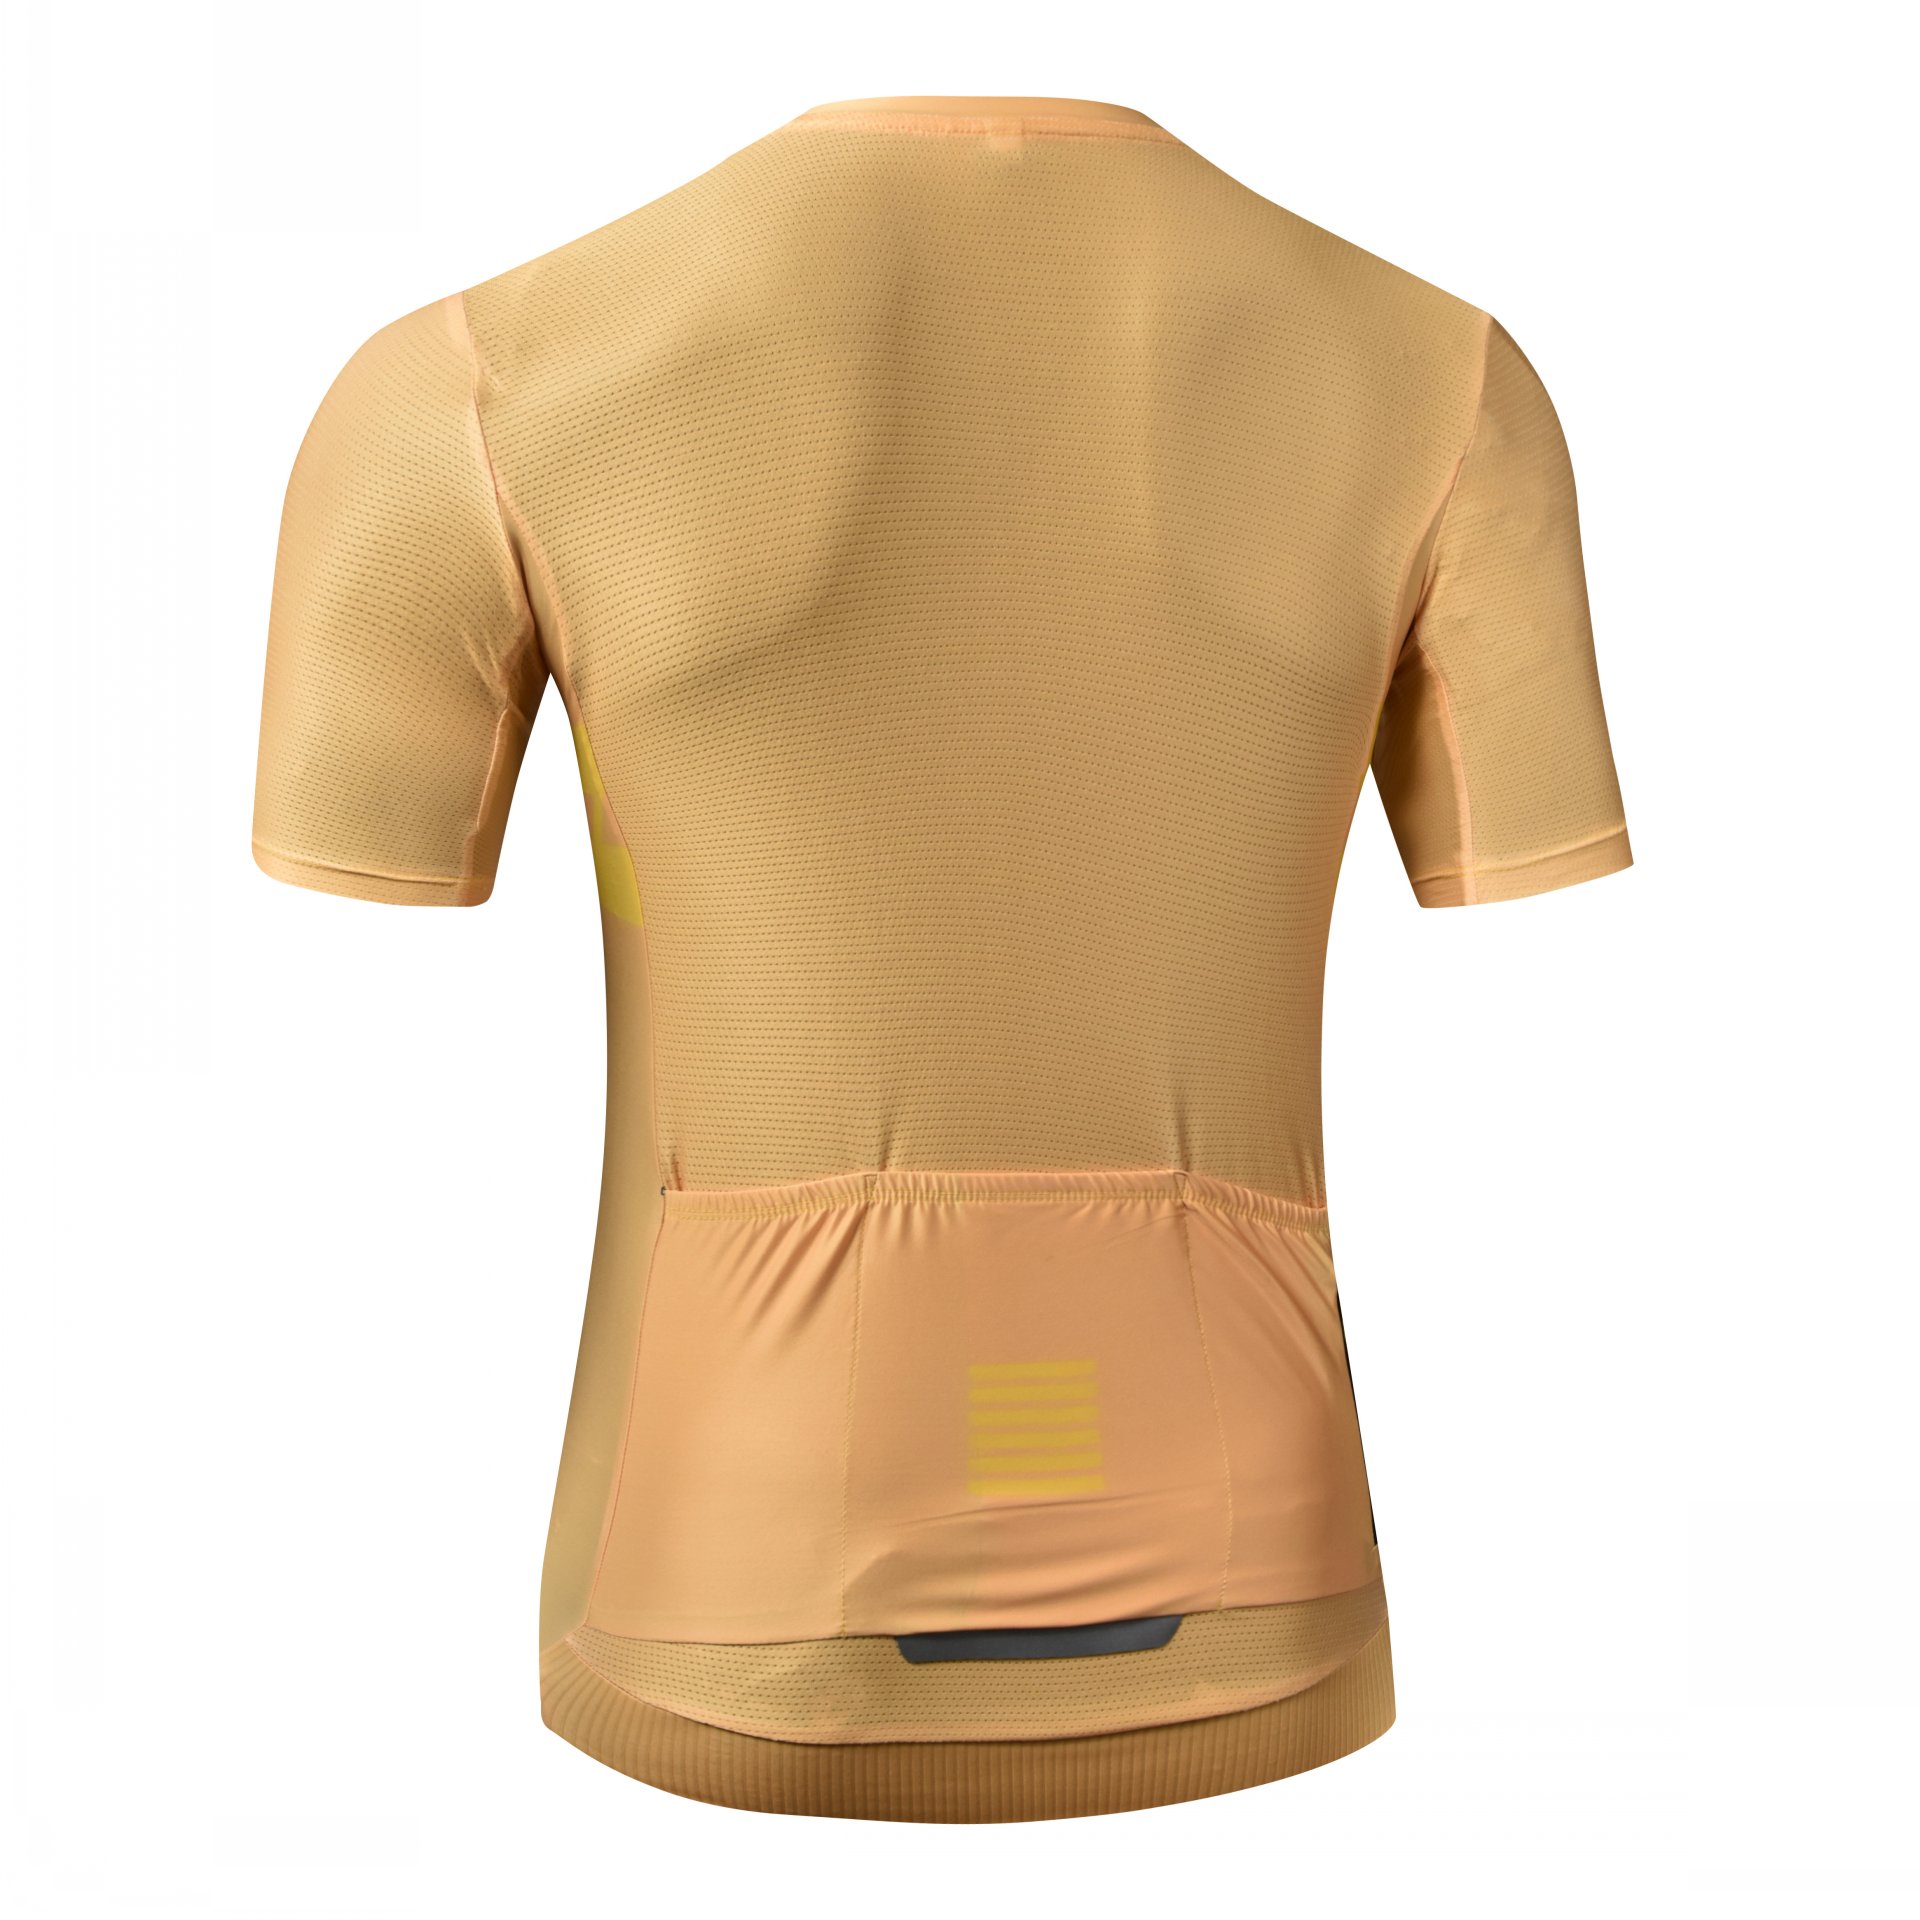 NEW ARRIVAL CYCLING JERSEY LATEST FABRIC-C11YBO2